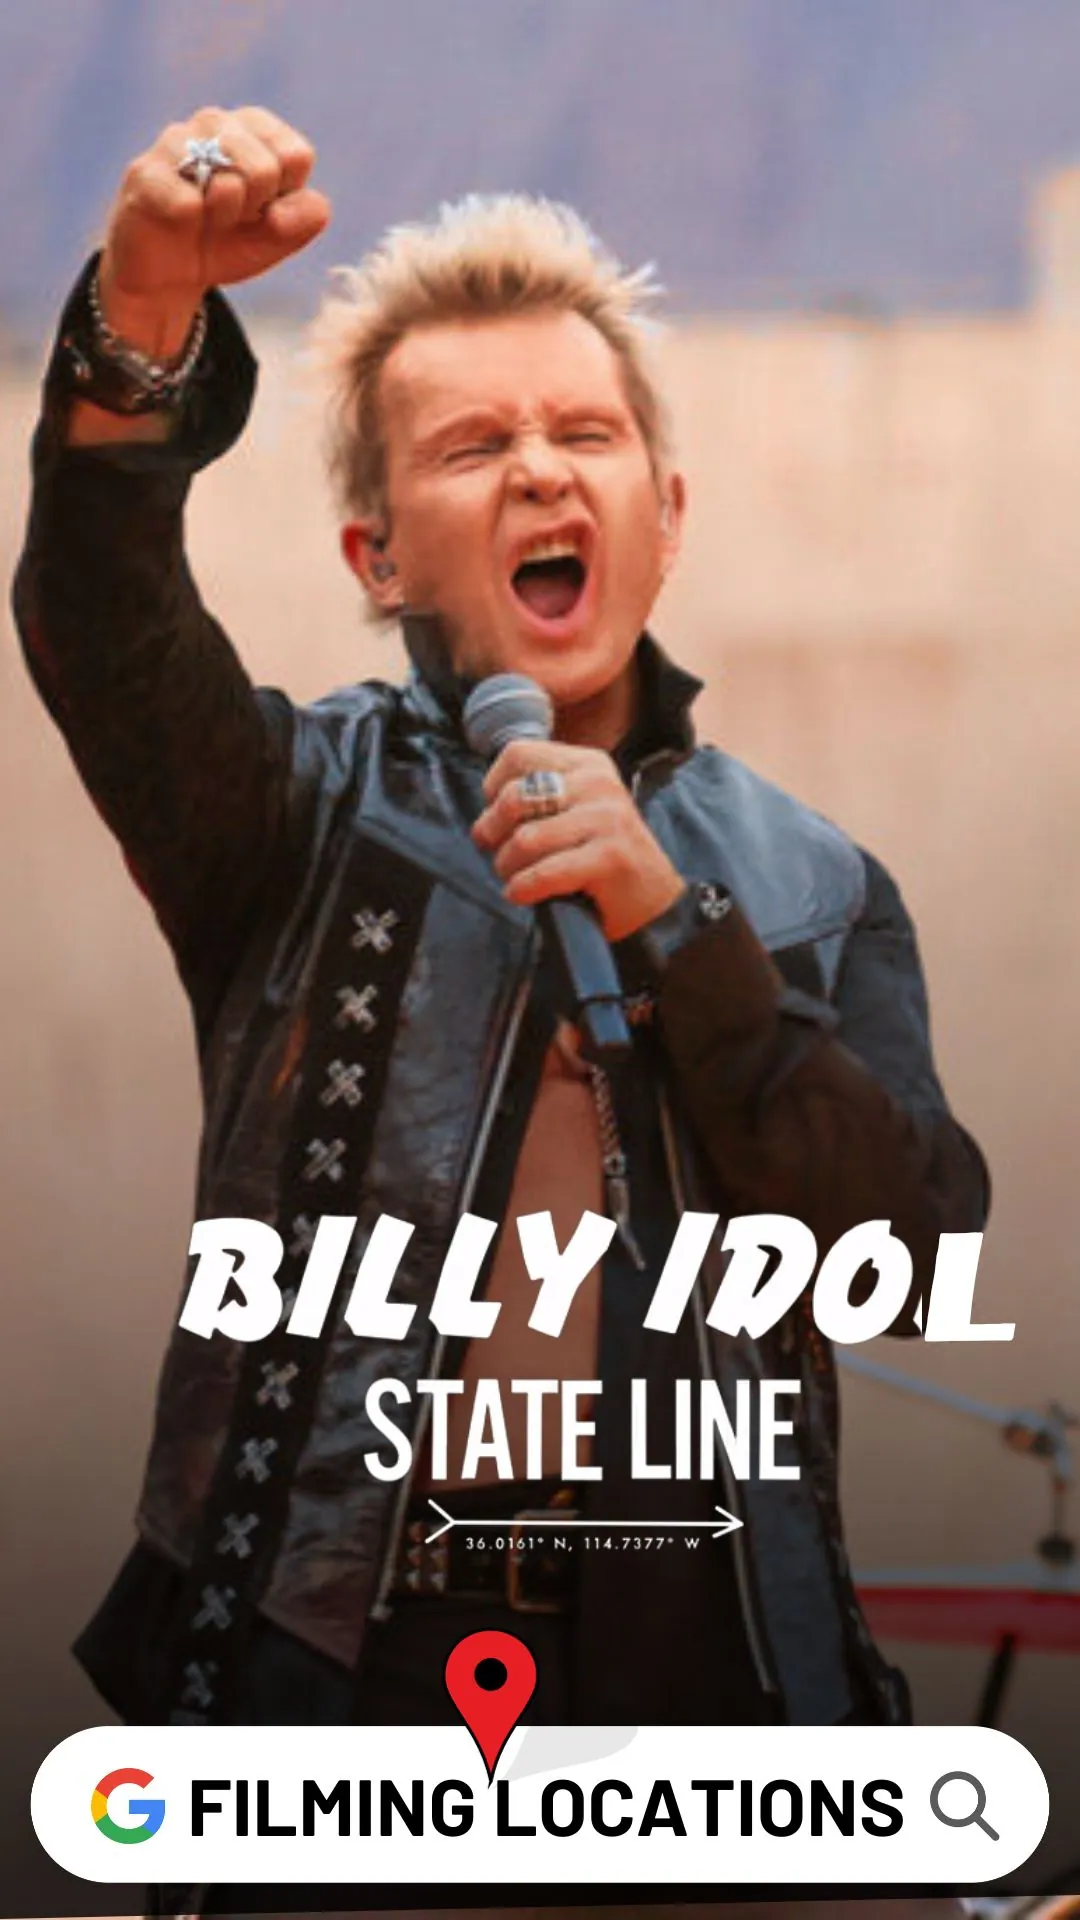 Billy Idol State Line Filming Locations